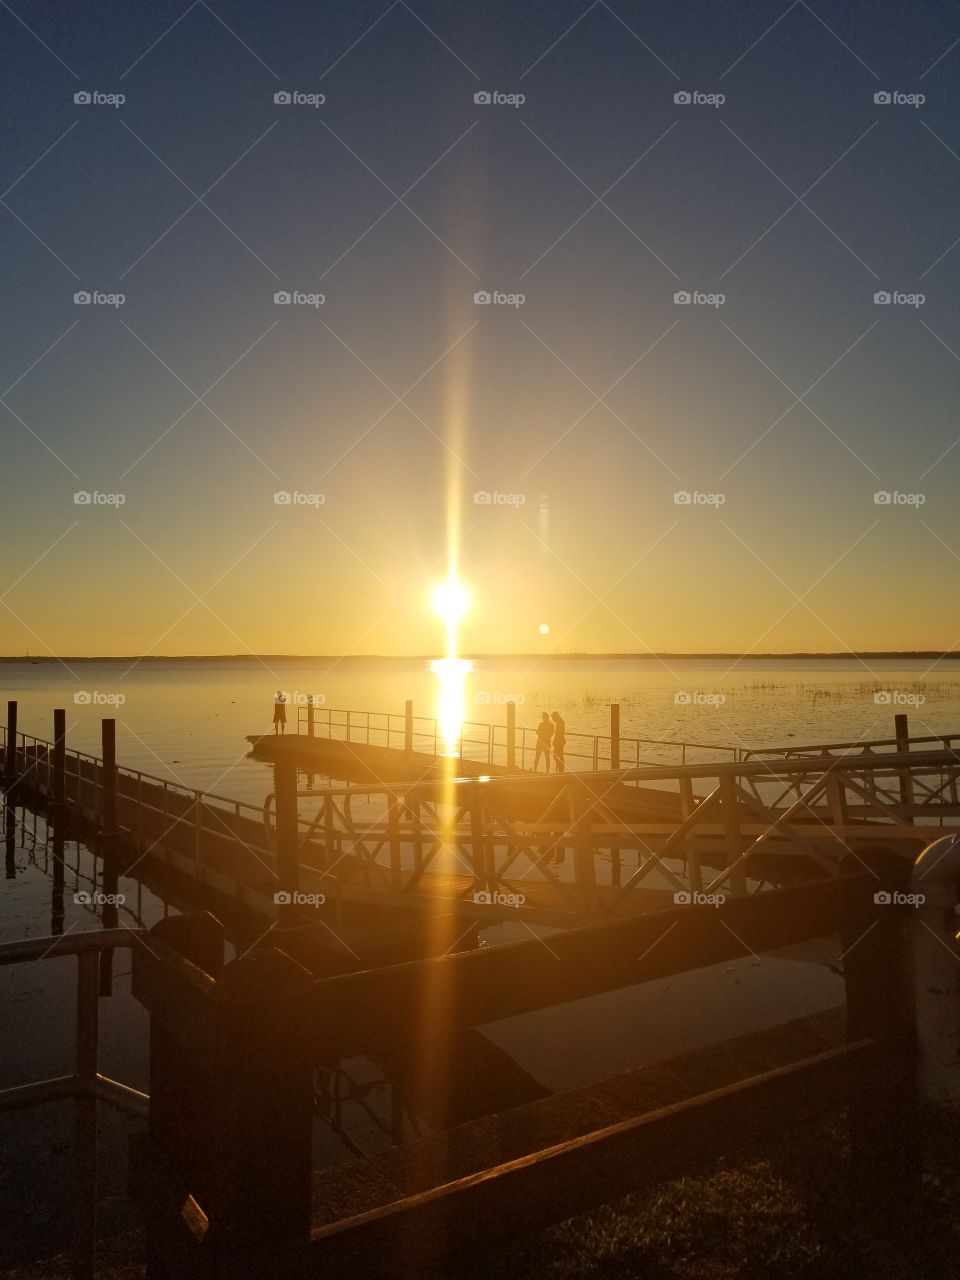 Beautiful Dockside Sunset off the water. Bright And relaxing. Take in all the moments. Take time to stop, get some fresh air and cherish simple little moments like this Sunset at the dock.